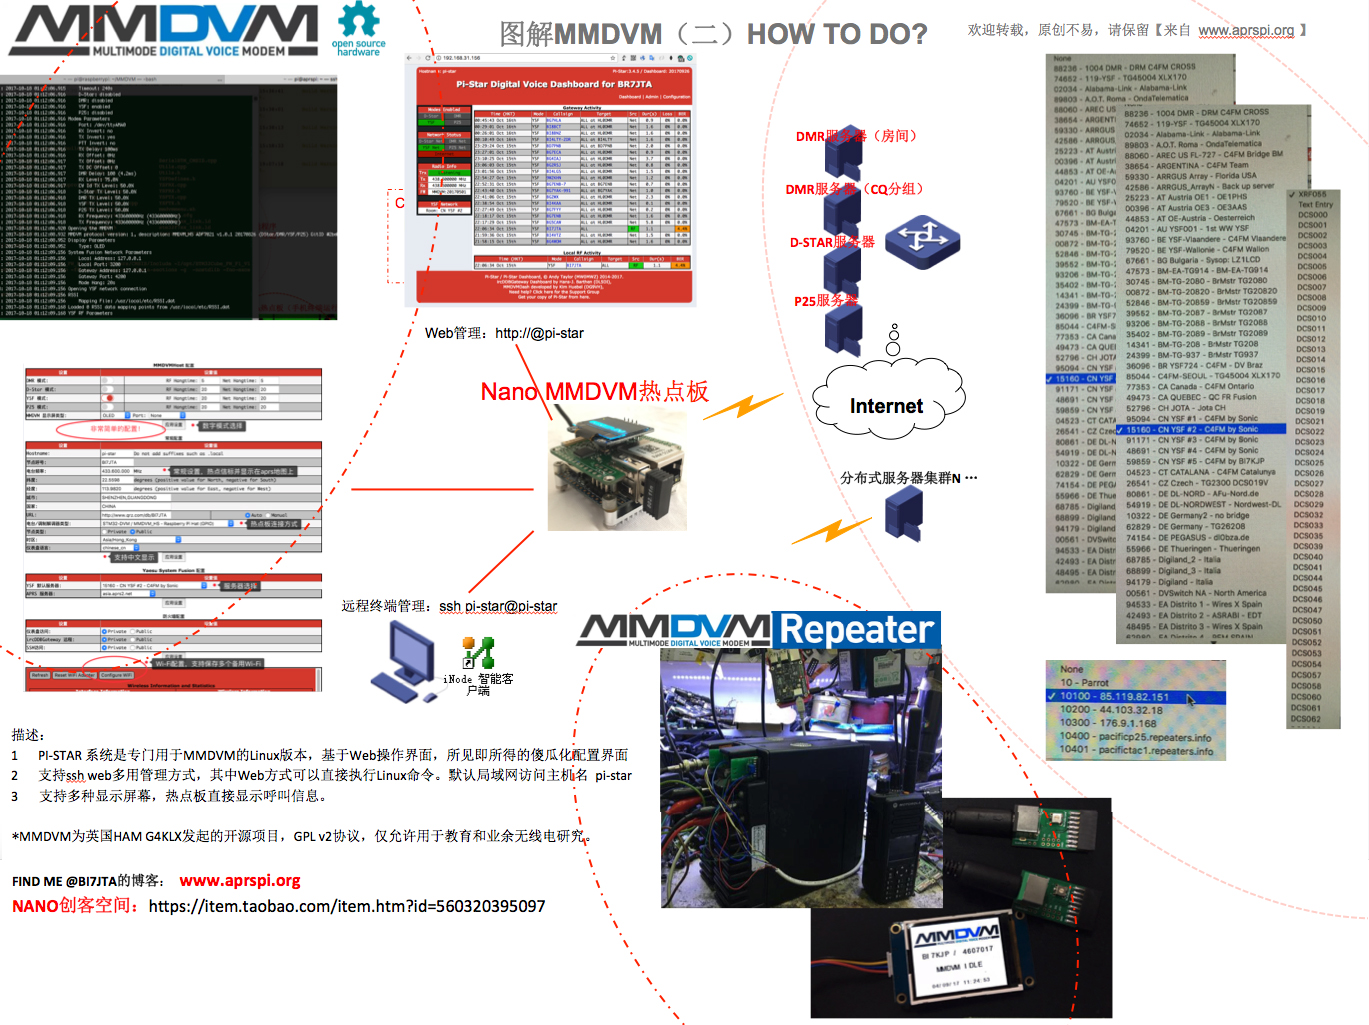 How-to-do-mmdvm.jpg